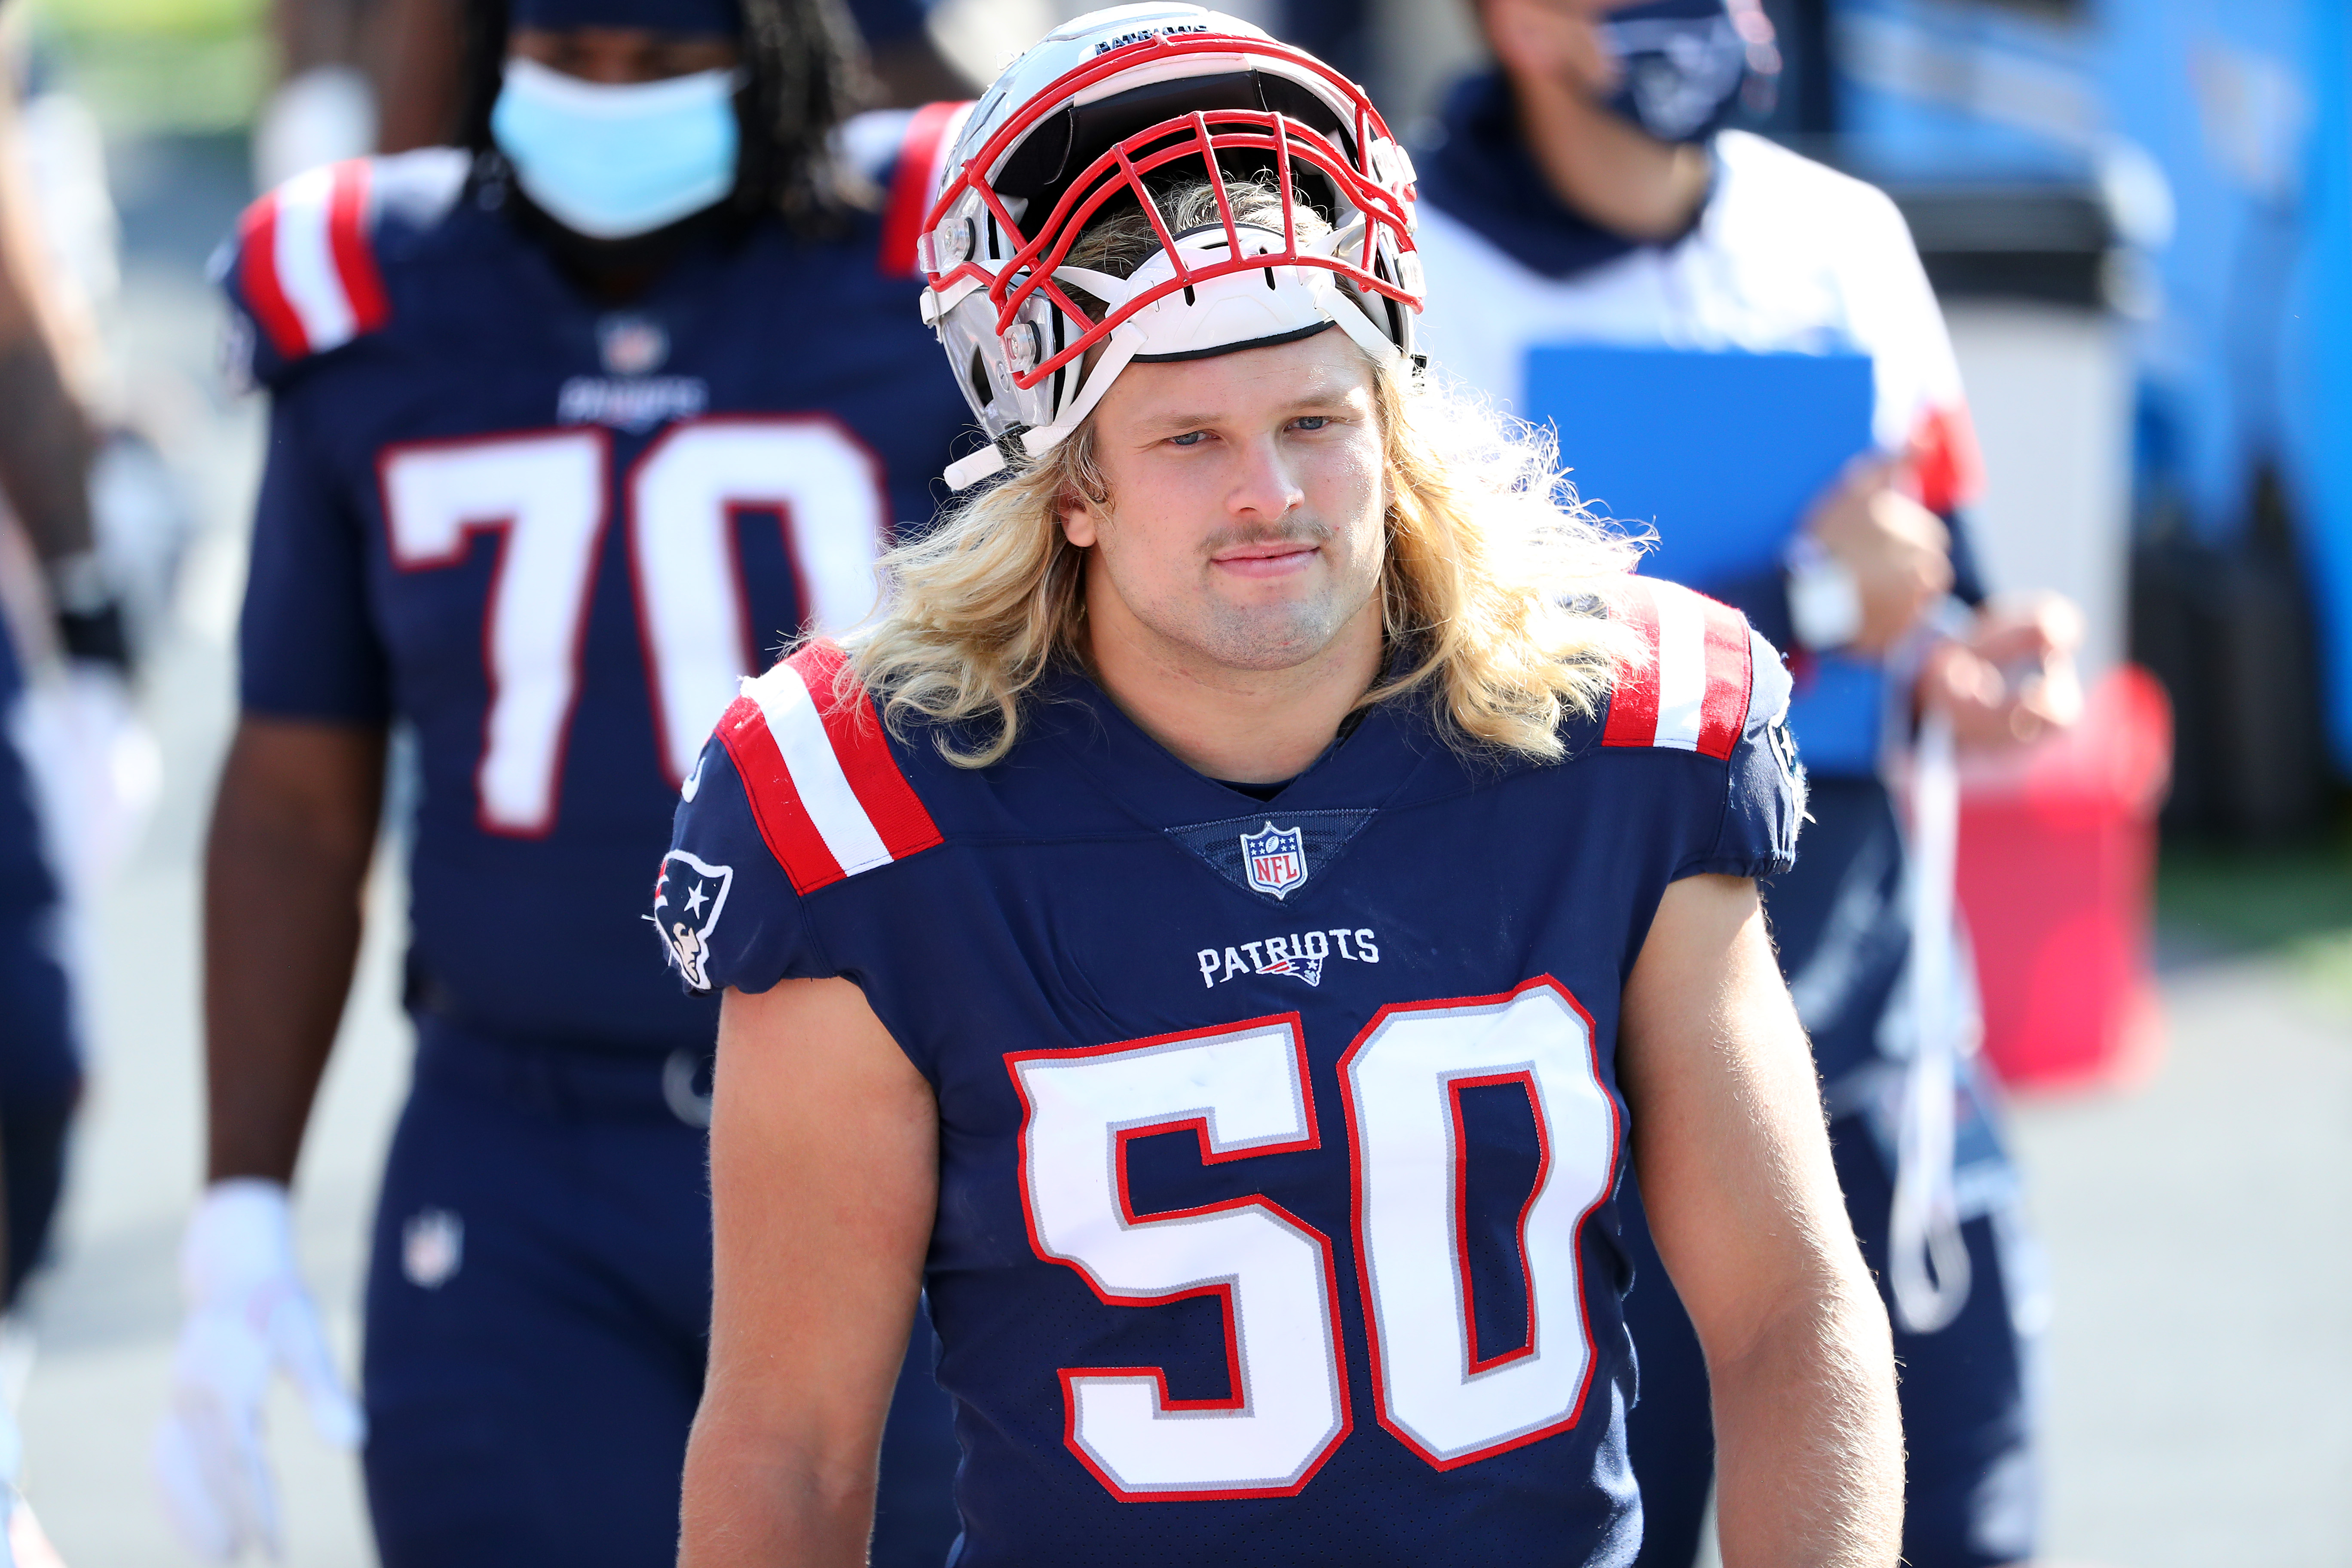 Listen to Chase Winovich every Thursday on Zolak & Bertrand. (Photo by Maddie Meyer/Getty Images)